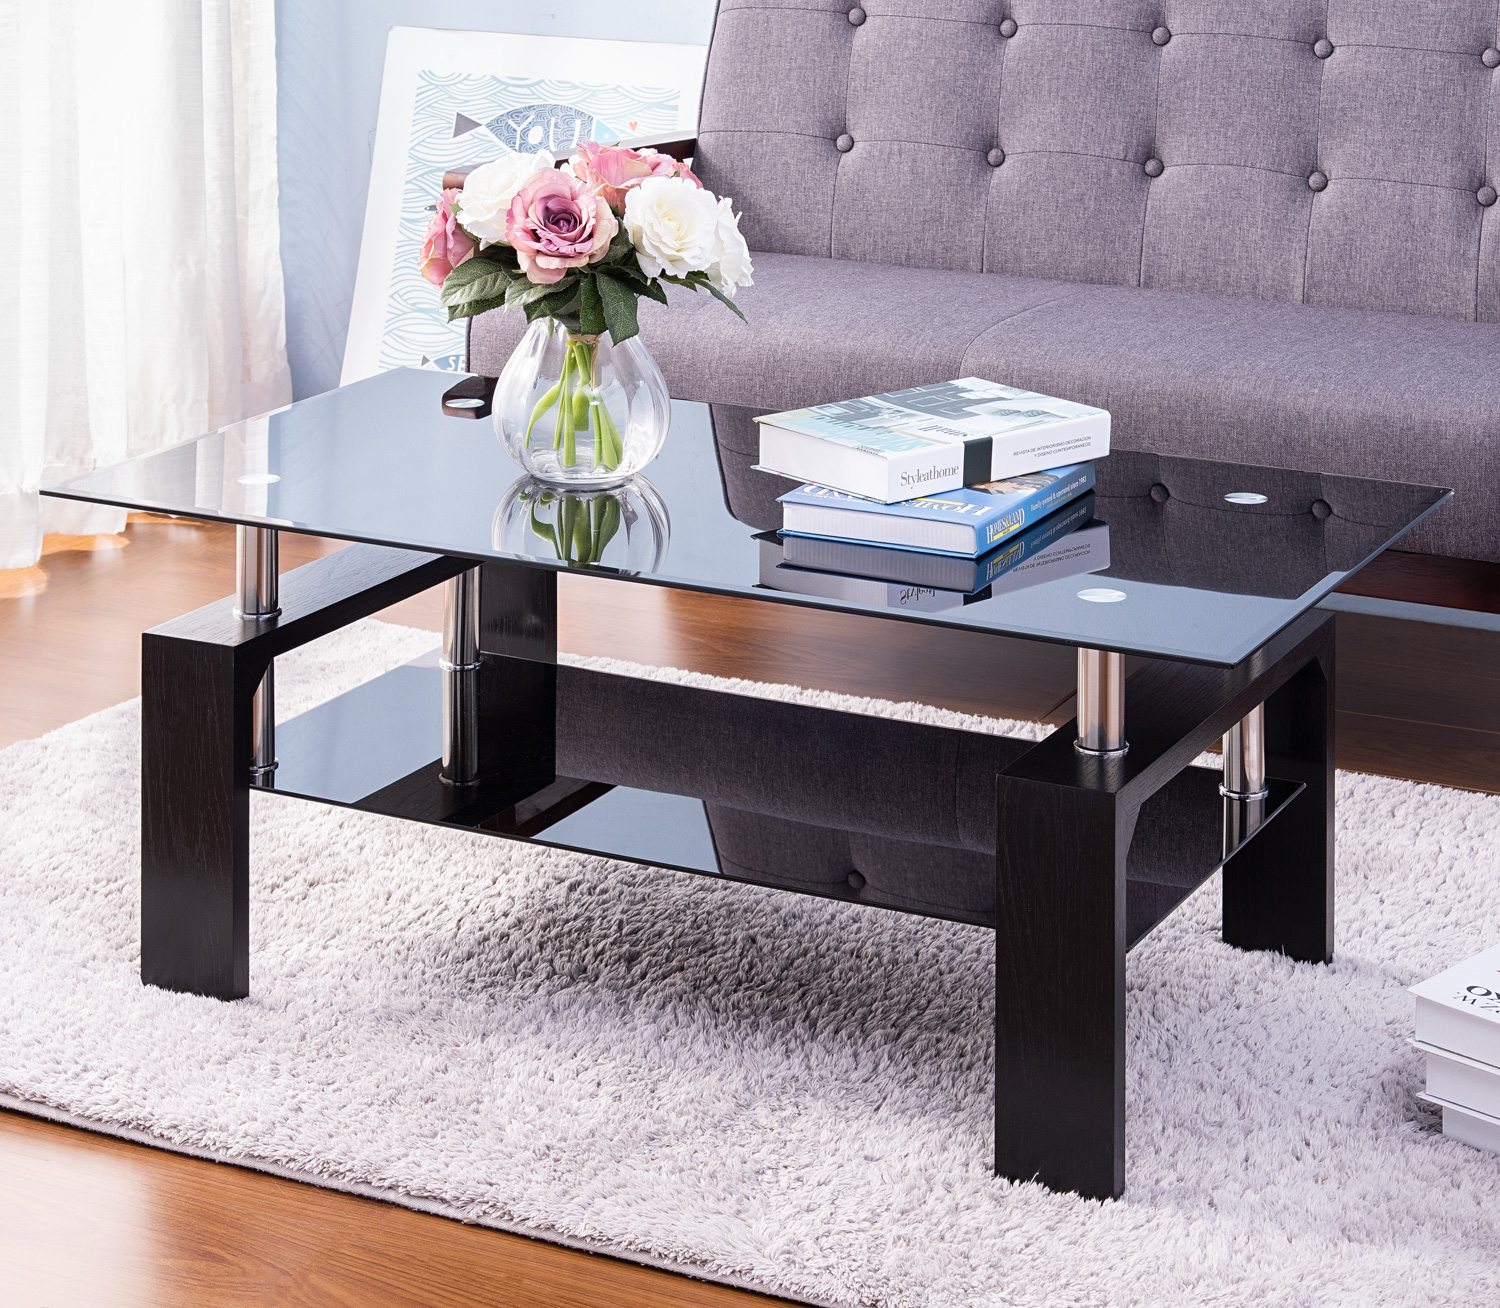 Rectangle Glass Coffee Table, Modern Side Center Table with Shelf & Wood Legs, Mid-Century Tempered Glass Top Tea Table for Living Room, Home Furniture Cocktail Coffee Table - Black, B1257 - image 1 of 8